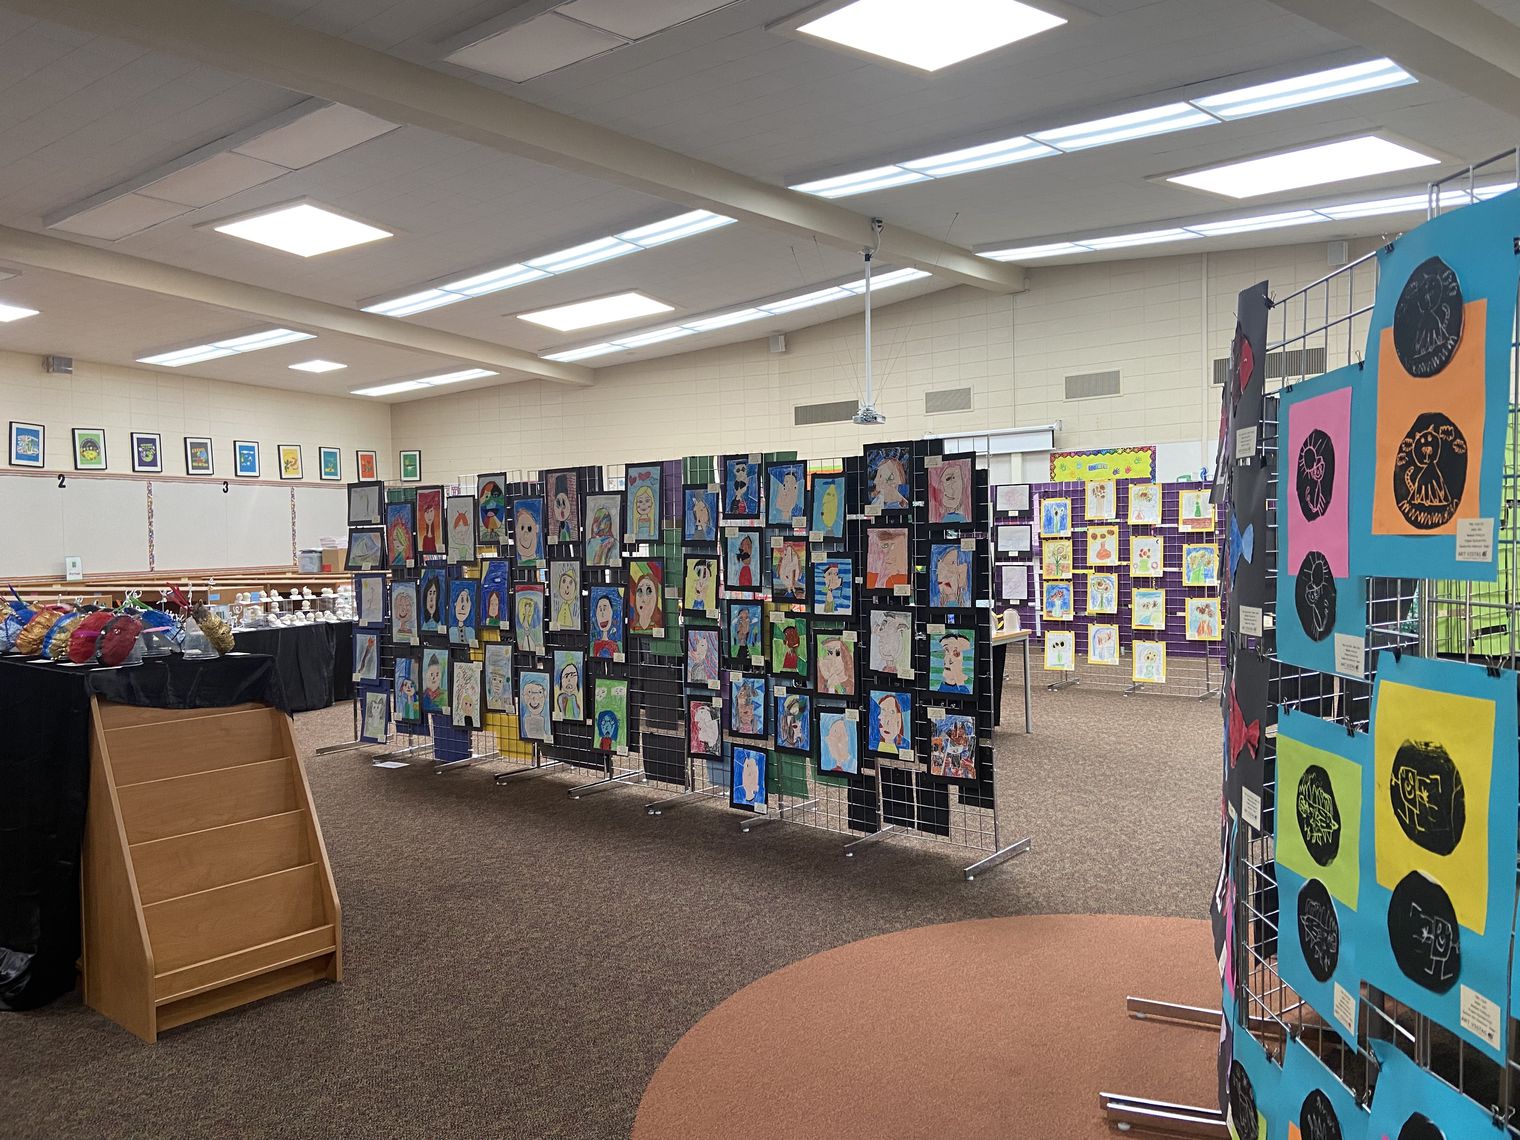 Student art in the school library